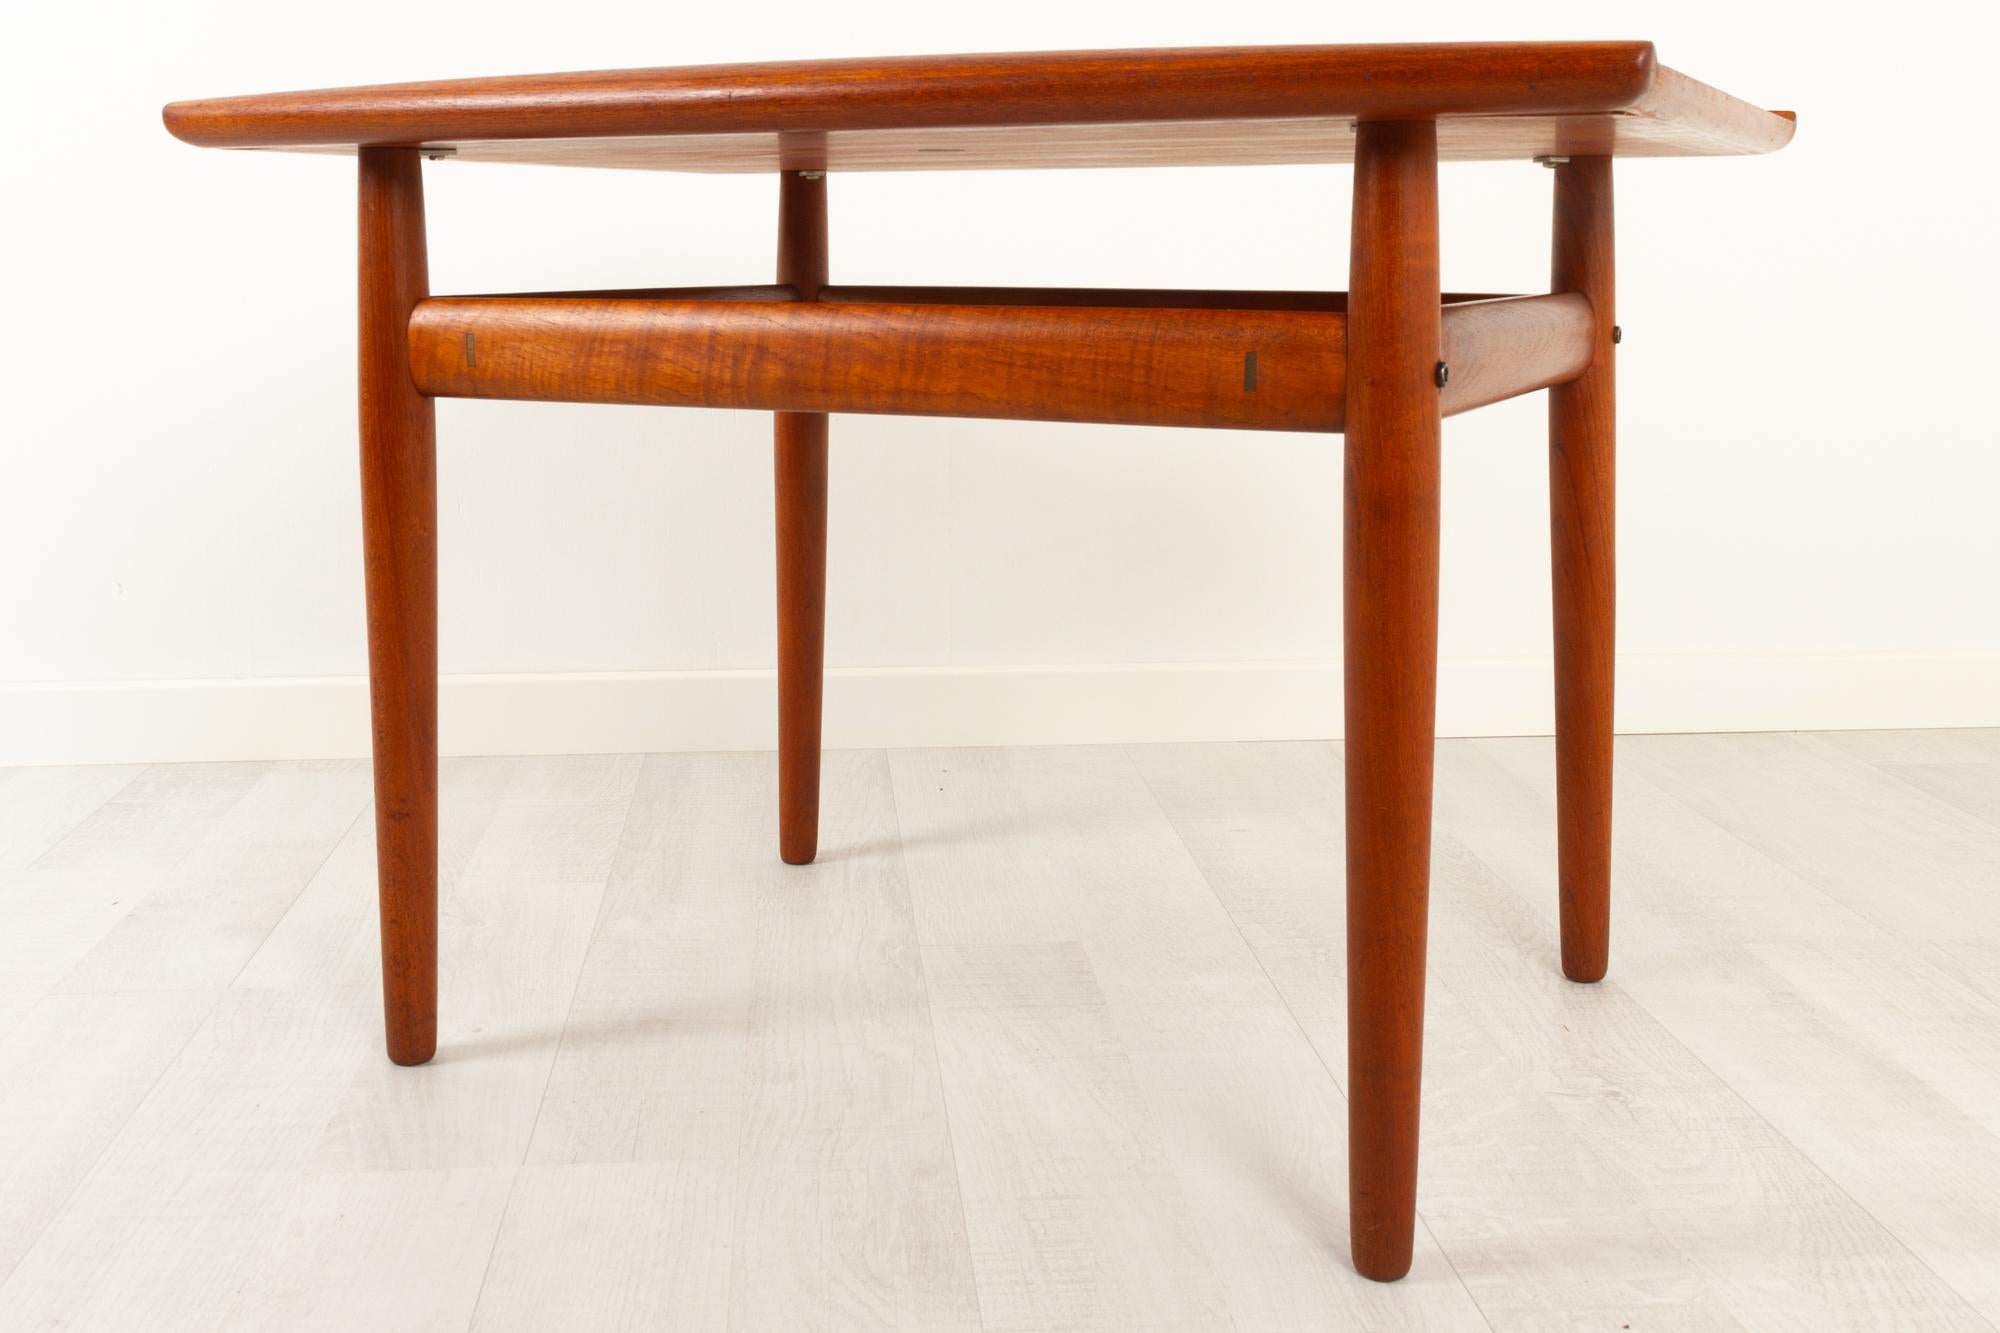 Vintage Danish teak side table by Grete Jalk for Glostrup Møbelfabrik, 1960s
Danish modern small coffee table with round tapered legs and frame in solid teak. Tabletop in teak veneer with raised edges also in solid teak.
Very elegant and decorative